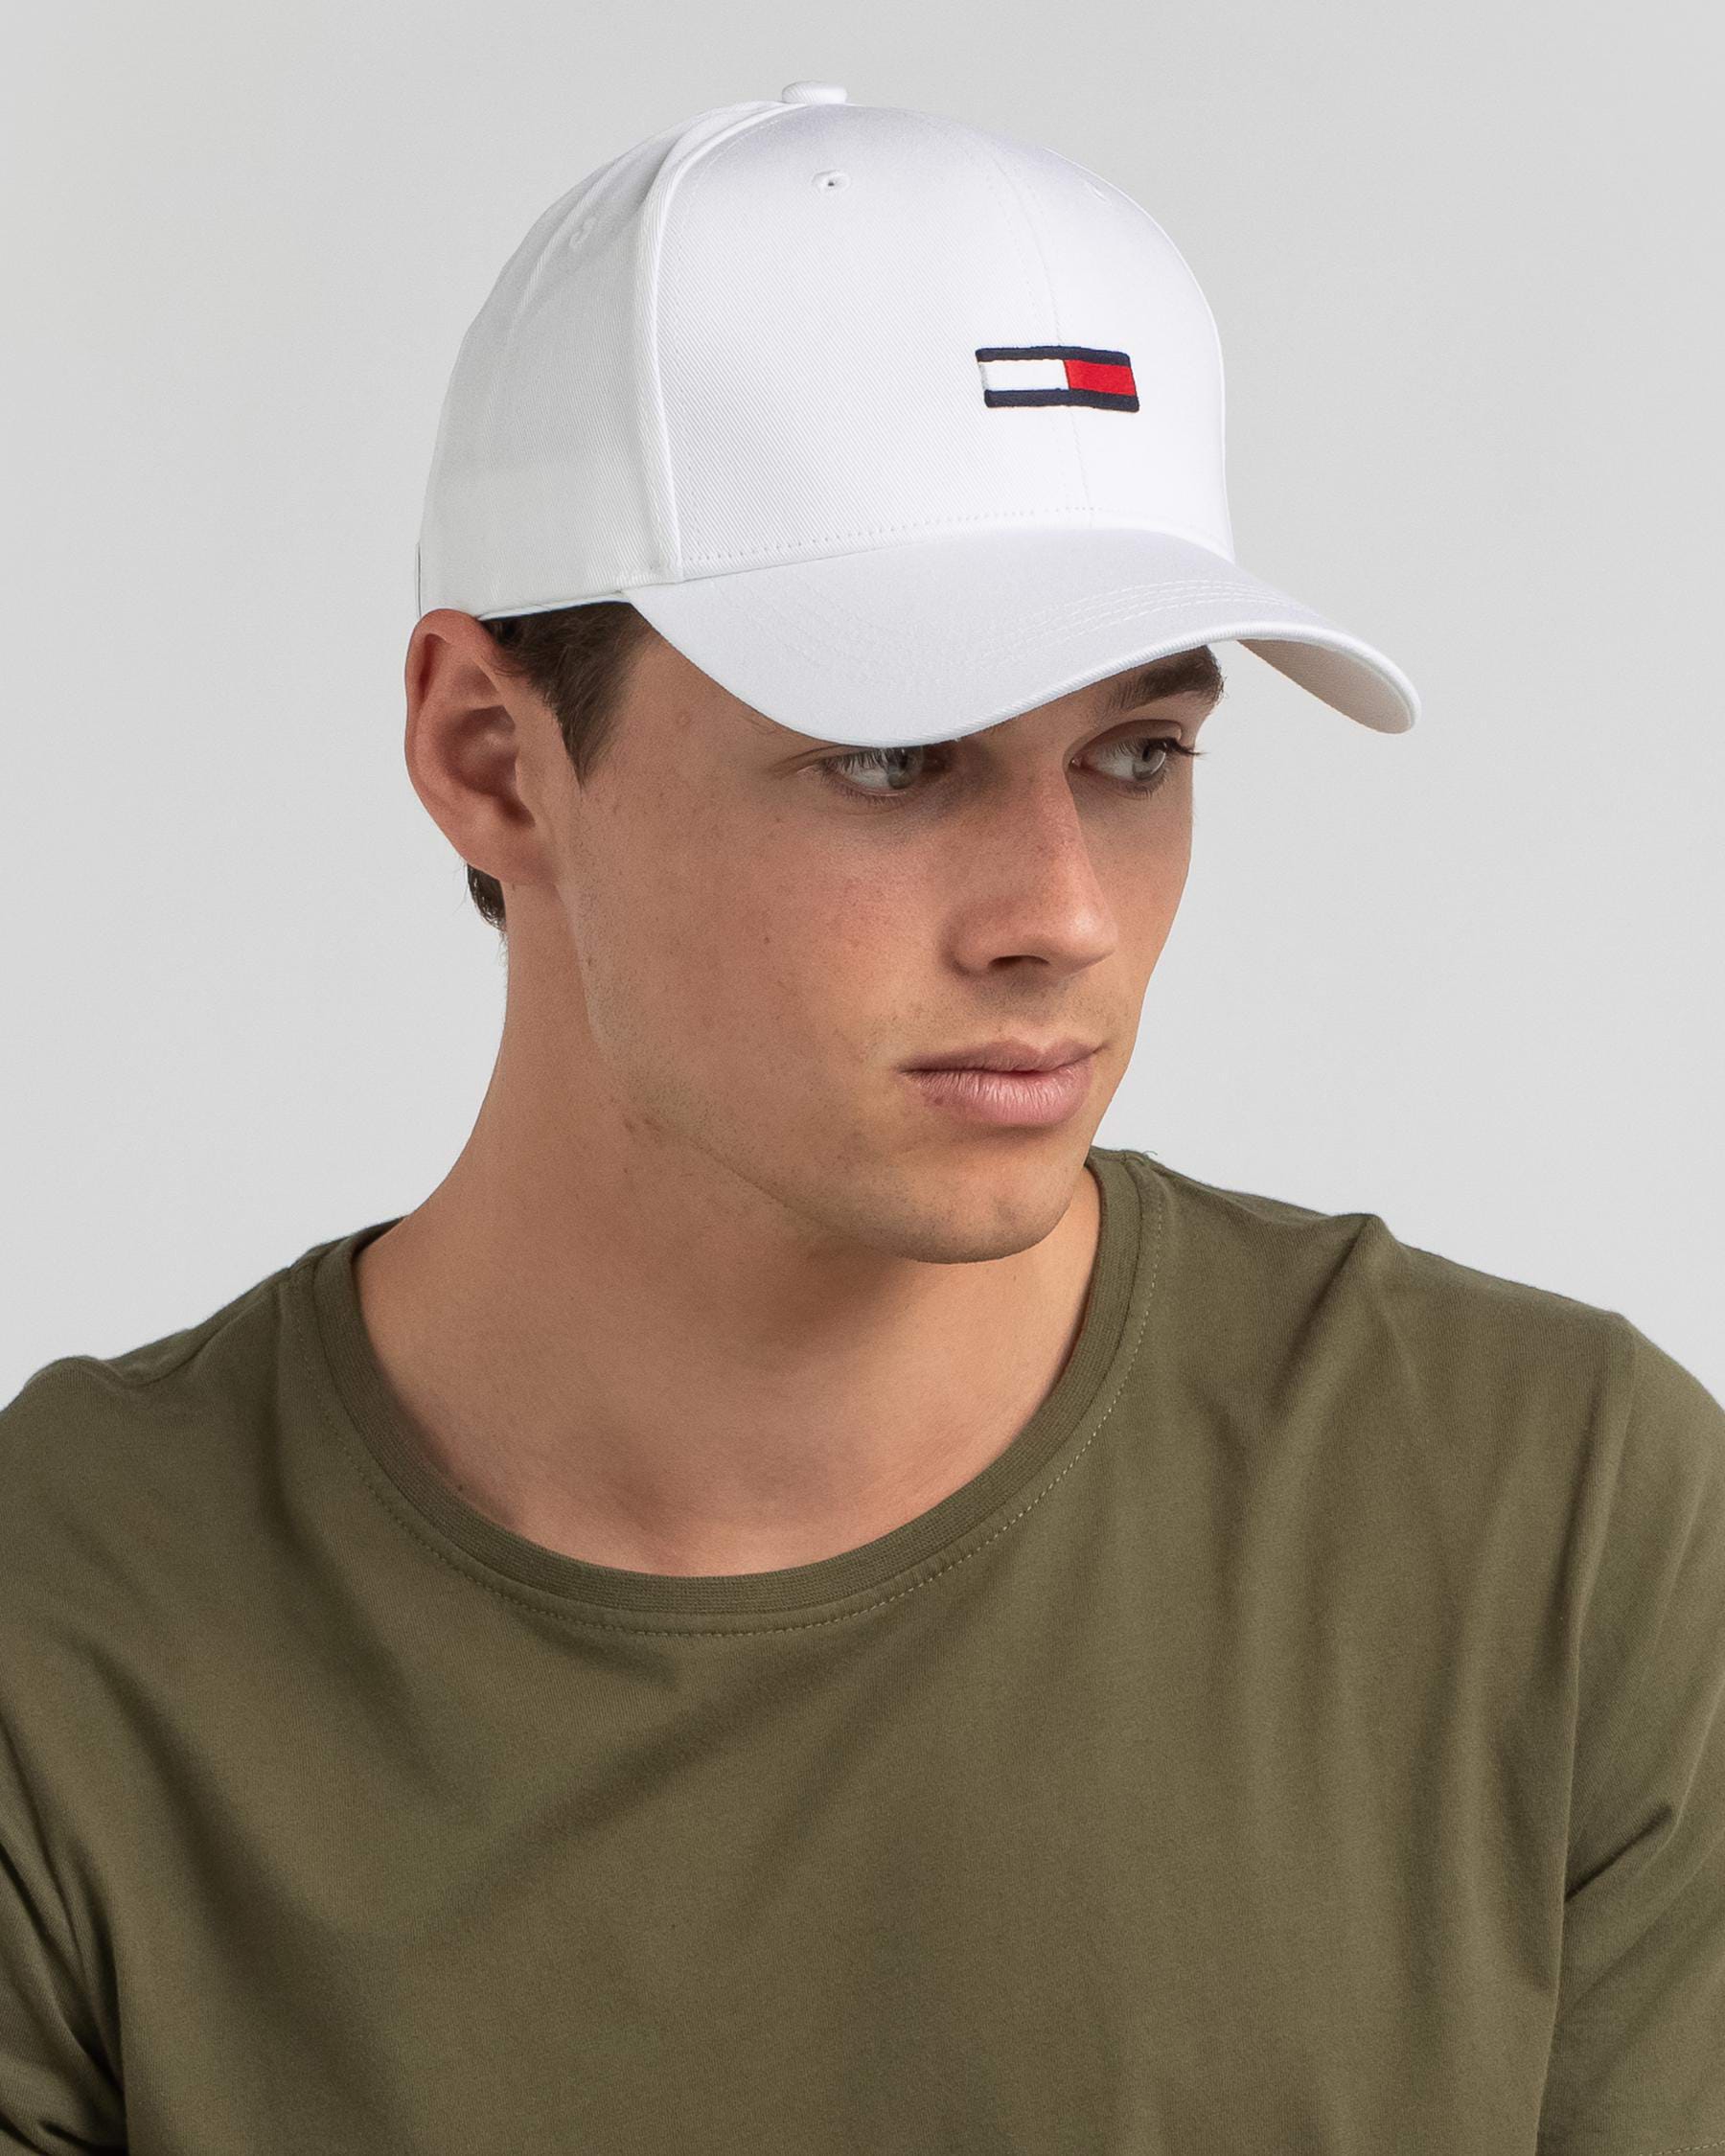 Beach & - - In TJM City Hilfiger States Cap Easy FREE* Flag White Shipping United Returns Tommy